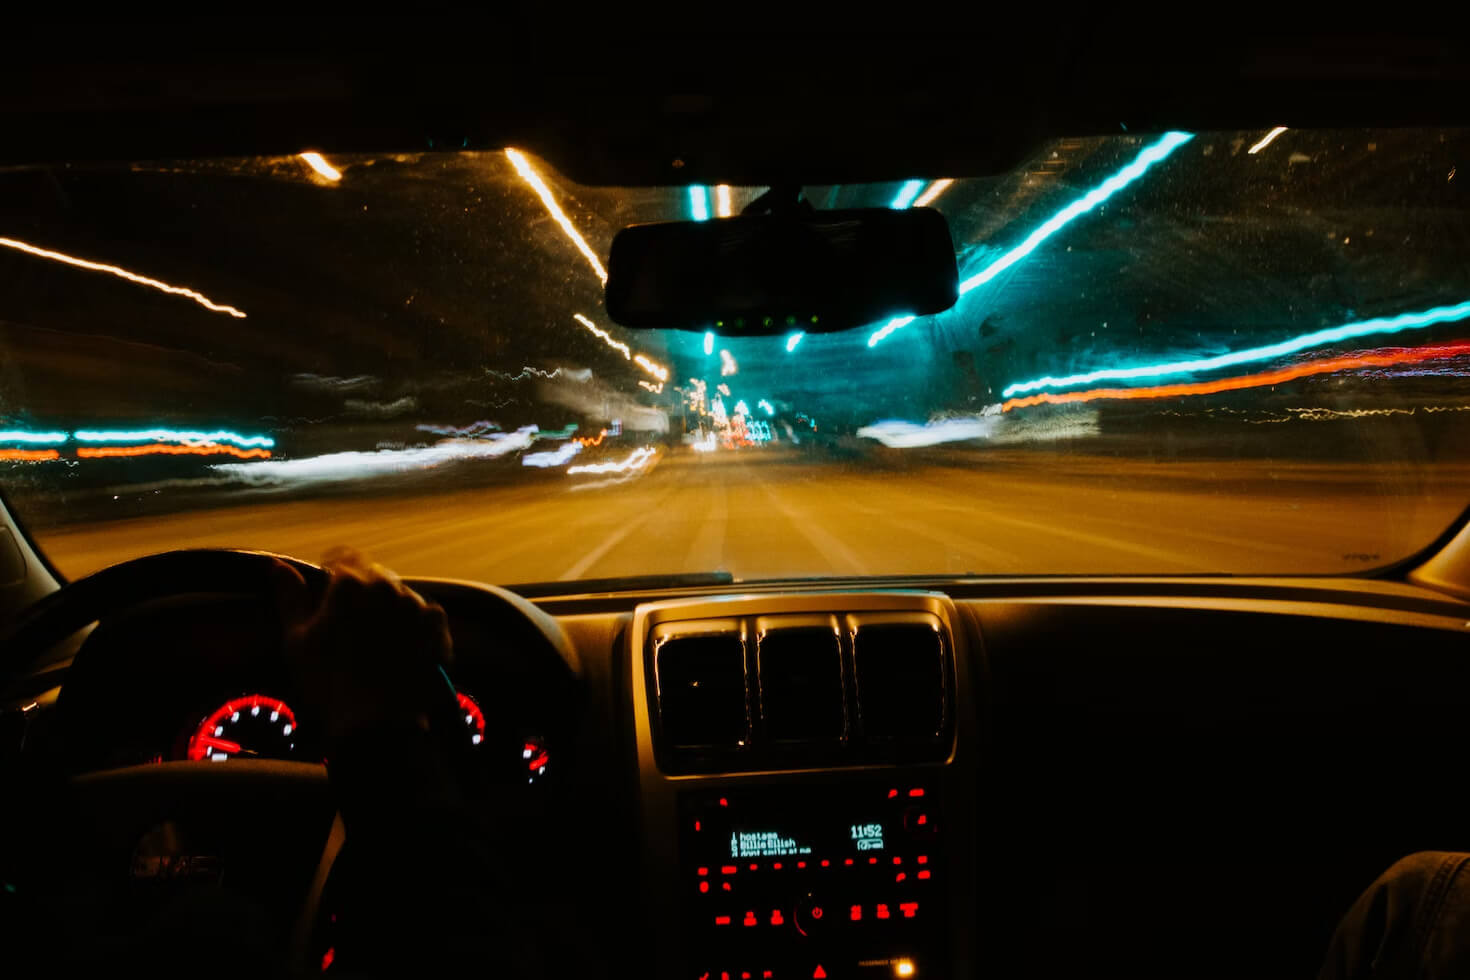 impaired driving concept image - blurred lights seen through car windshield